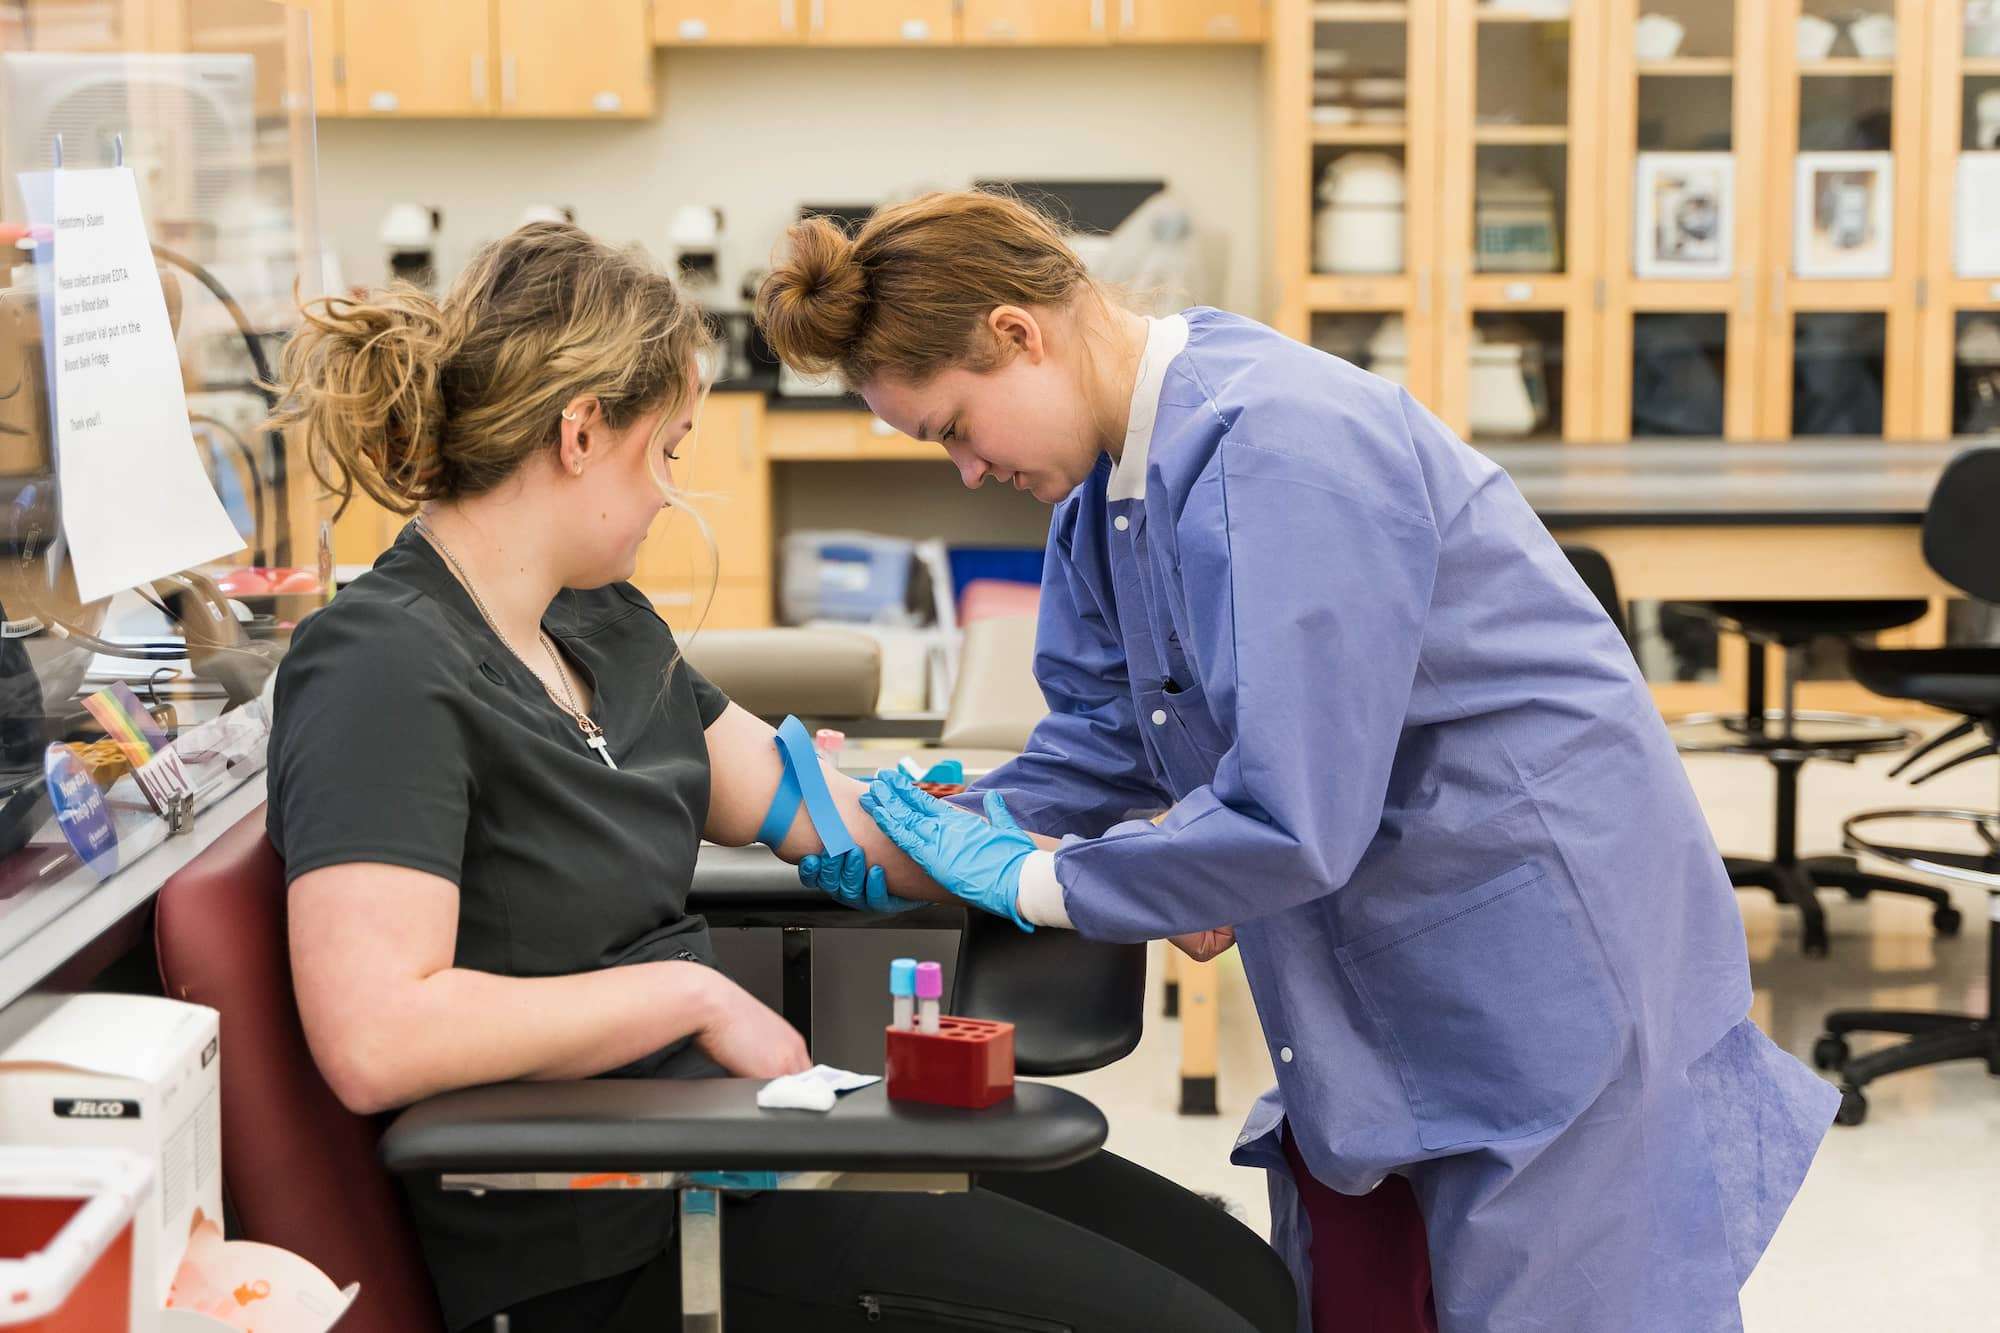 A view from the side of a Phlebotomy student placing their hand on a patient's forearm before drawing blood.